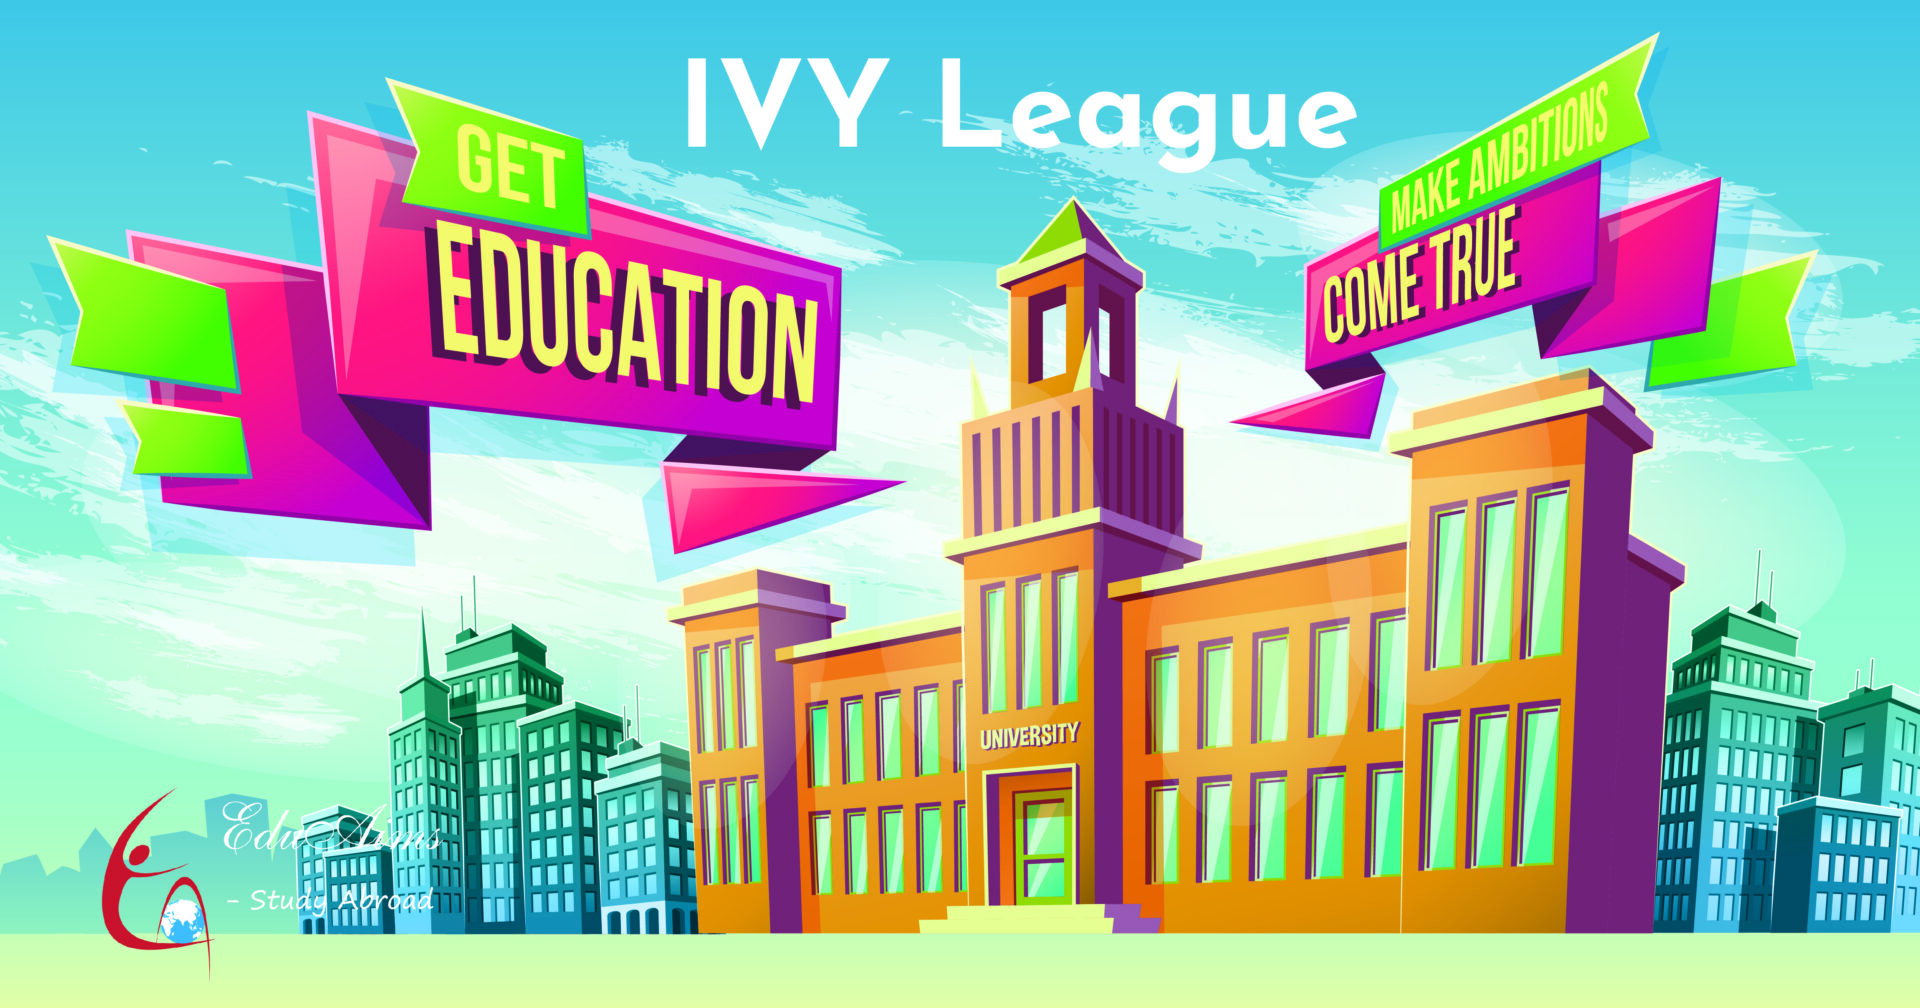 GRE for Ivy League